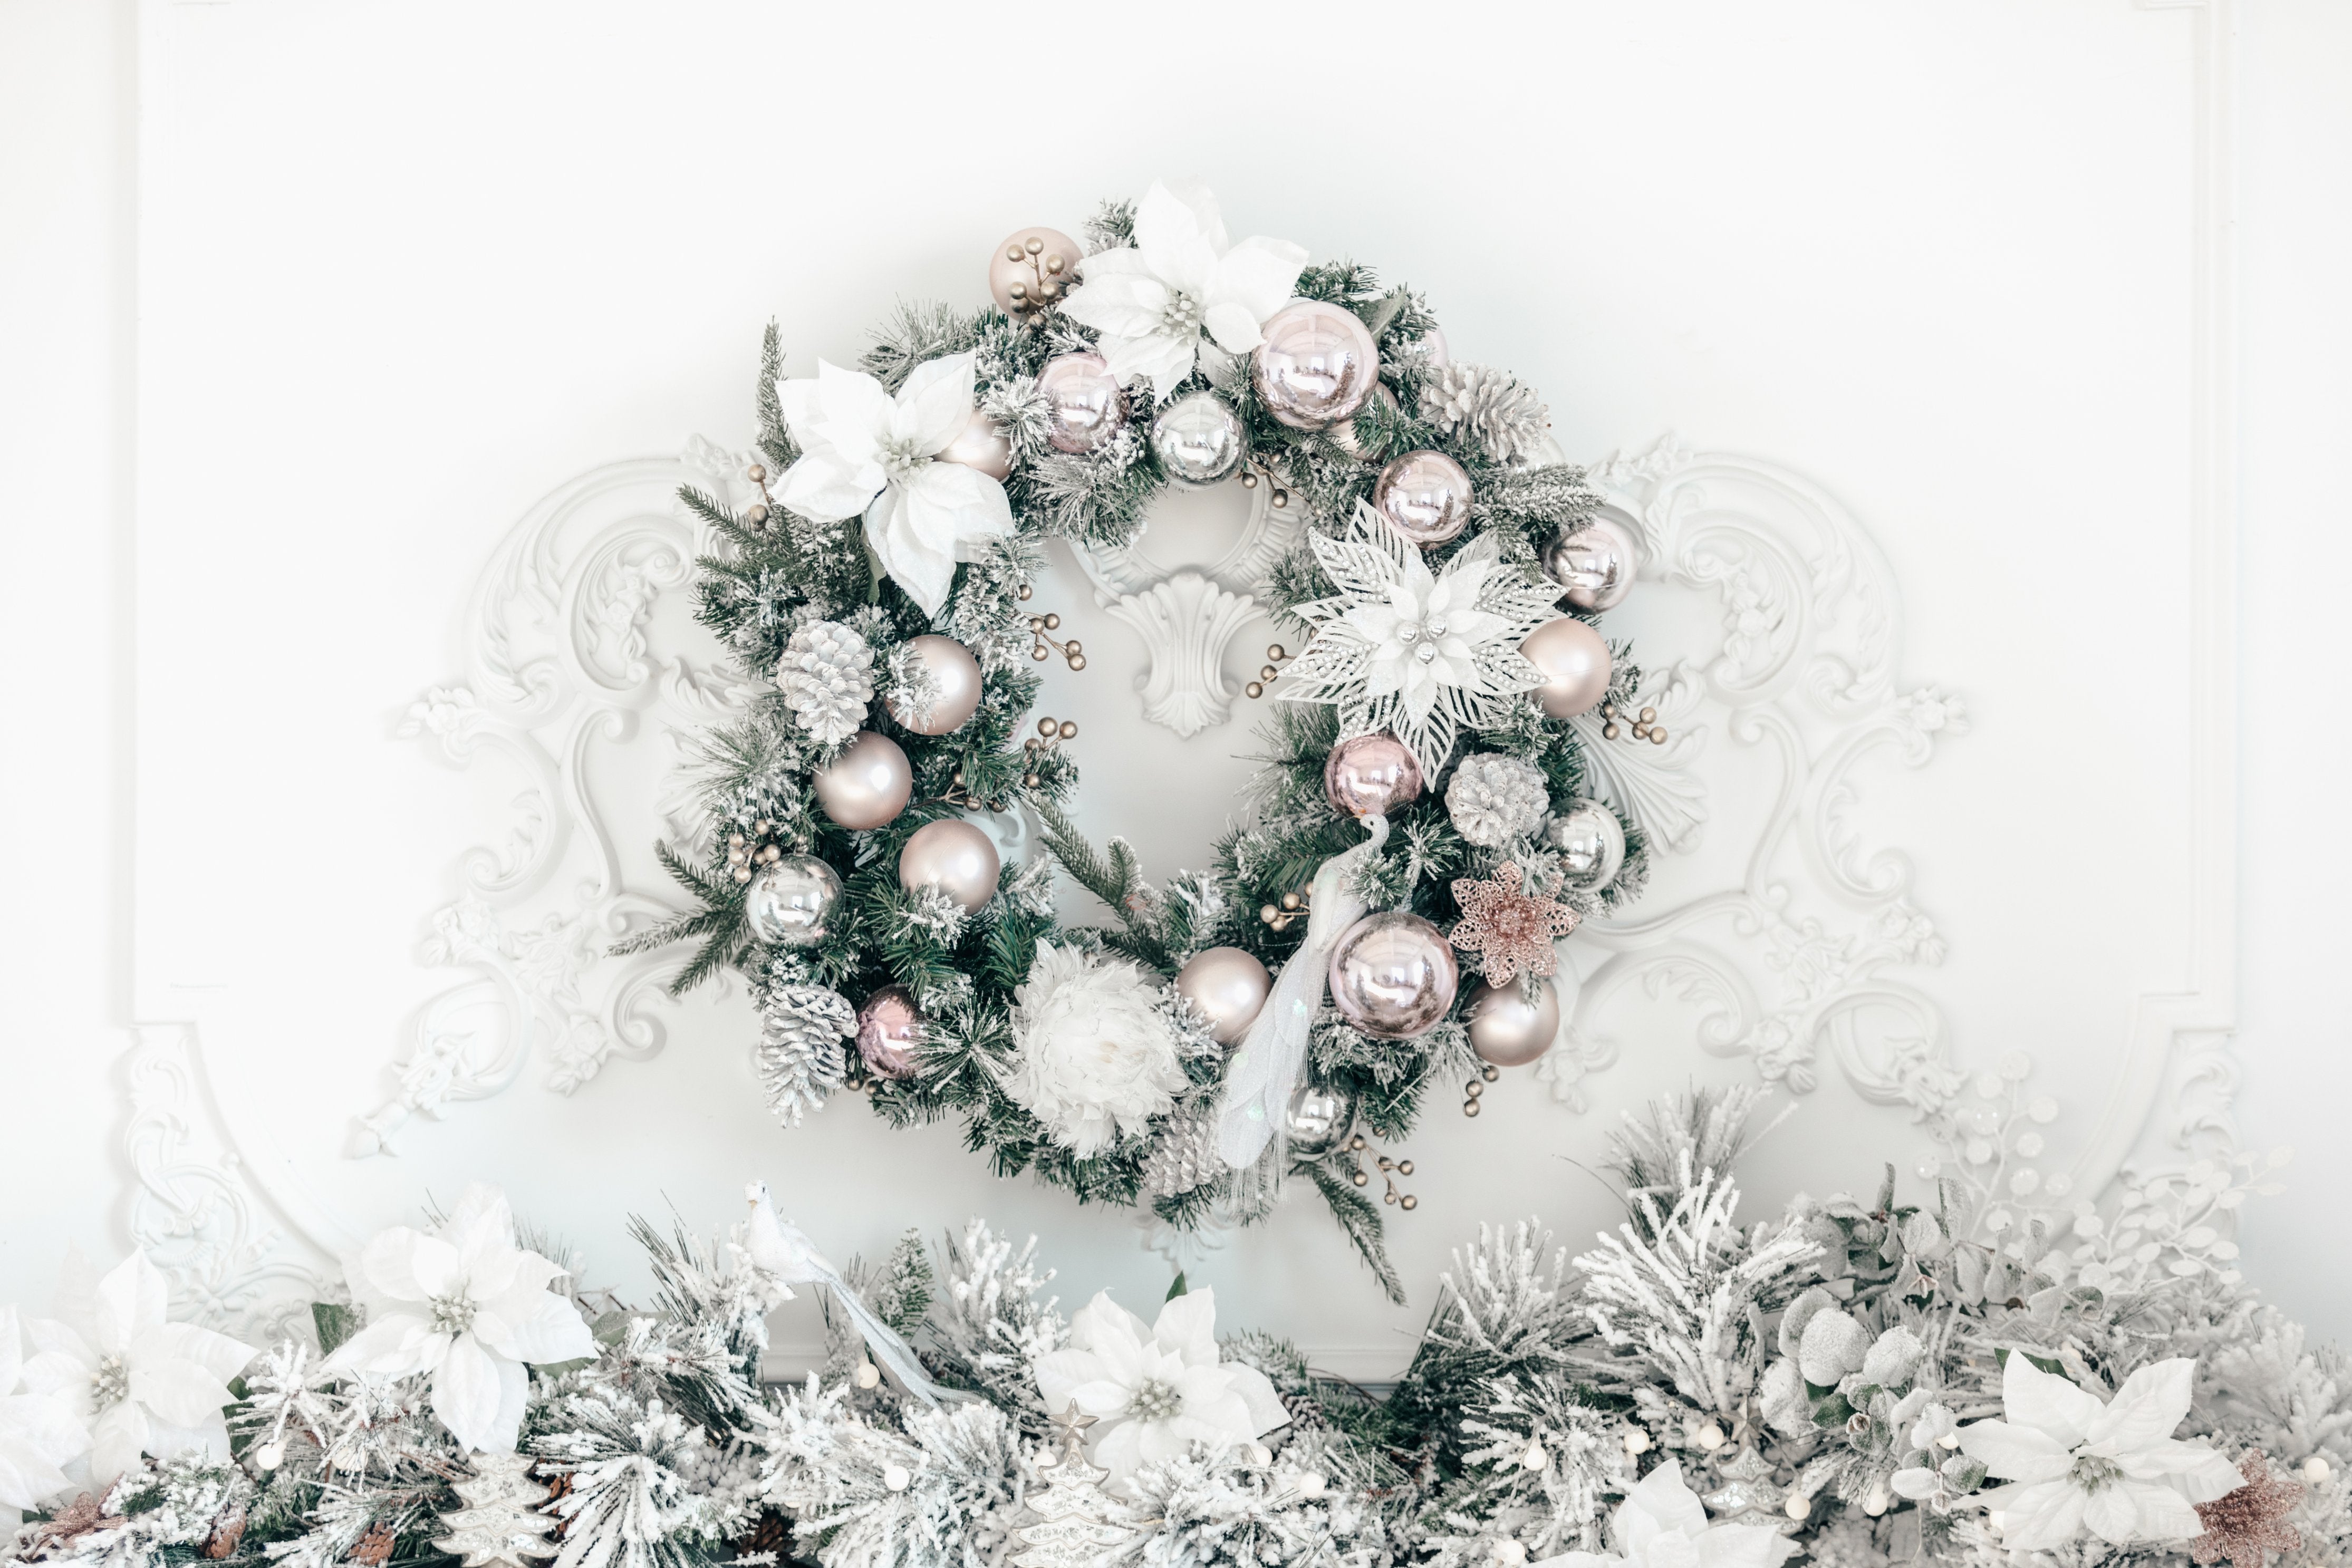 A white and silver Christmas wreath and garland